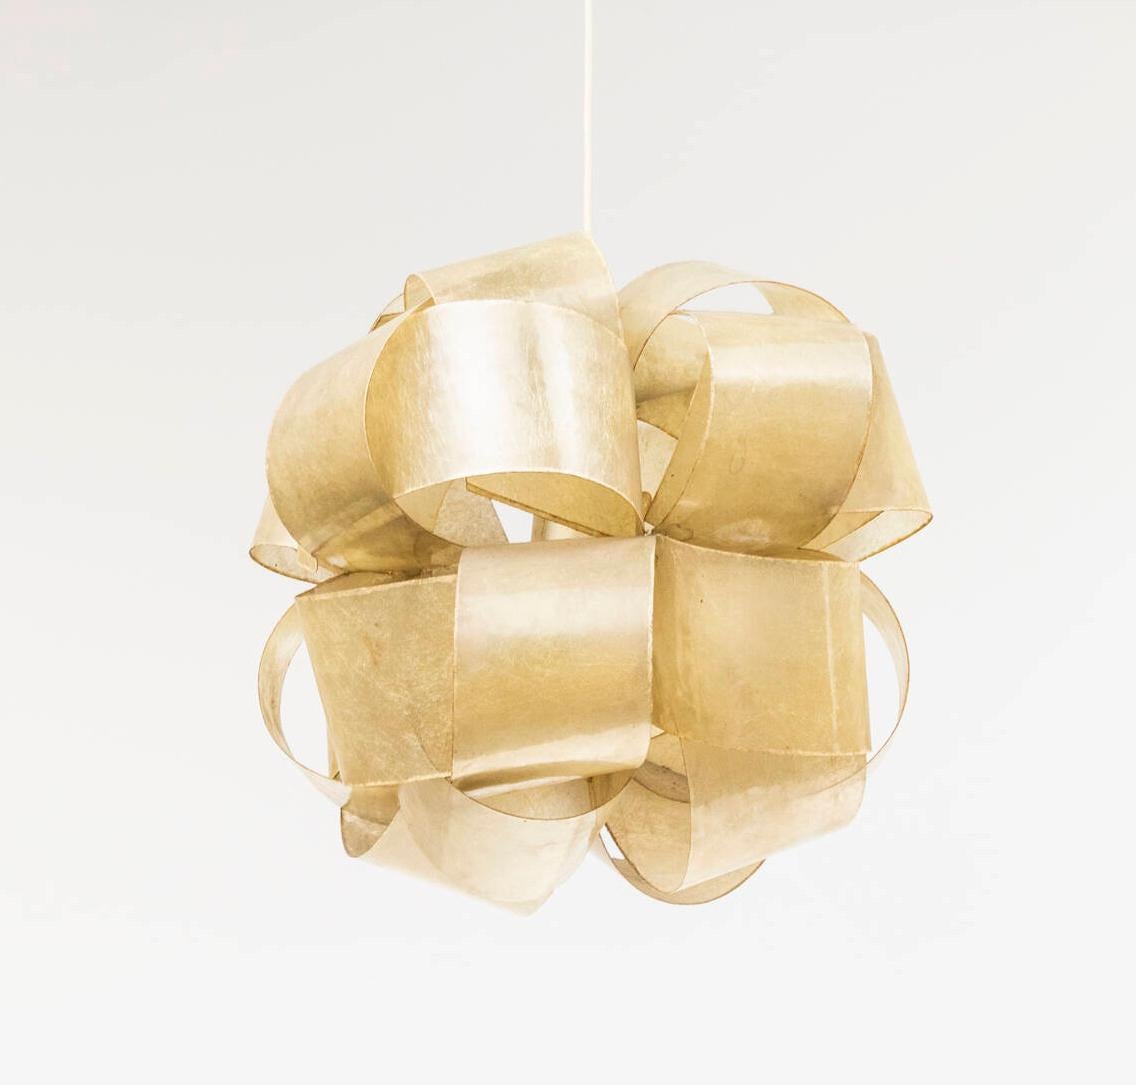 Post -Modern  'Spire' (spirals) ceiling light by Enrico Botta for Diner, Italy, 1970.  
 Made of curved and intertwined fiberglass sheets which are held together by a smart metal plug-in system, it mimics the elegant shape of a ribbon. 
 Very good